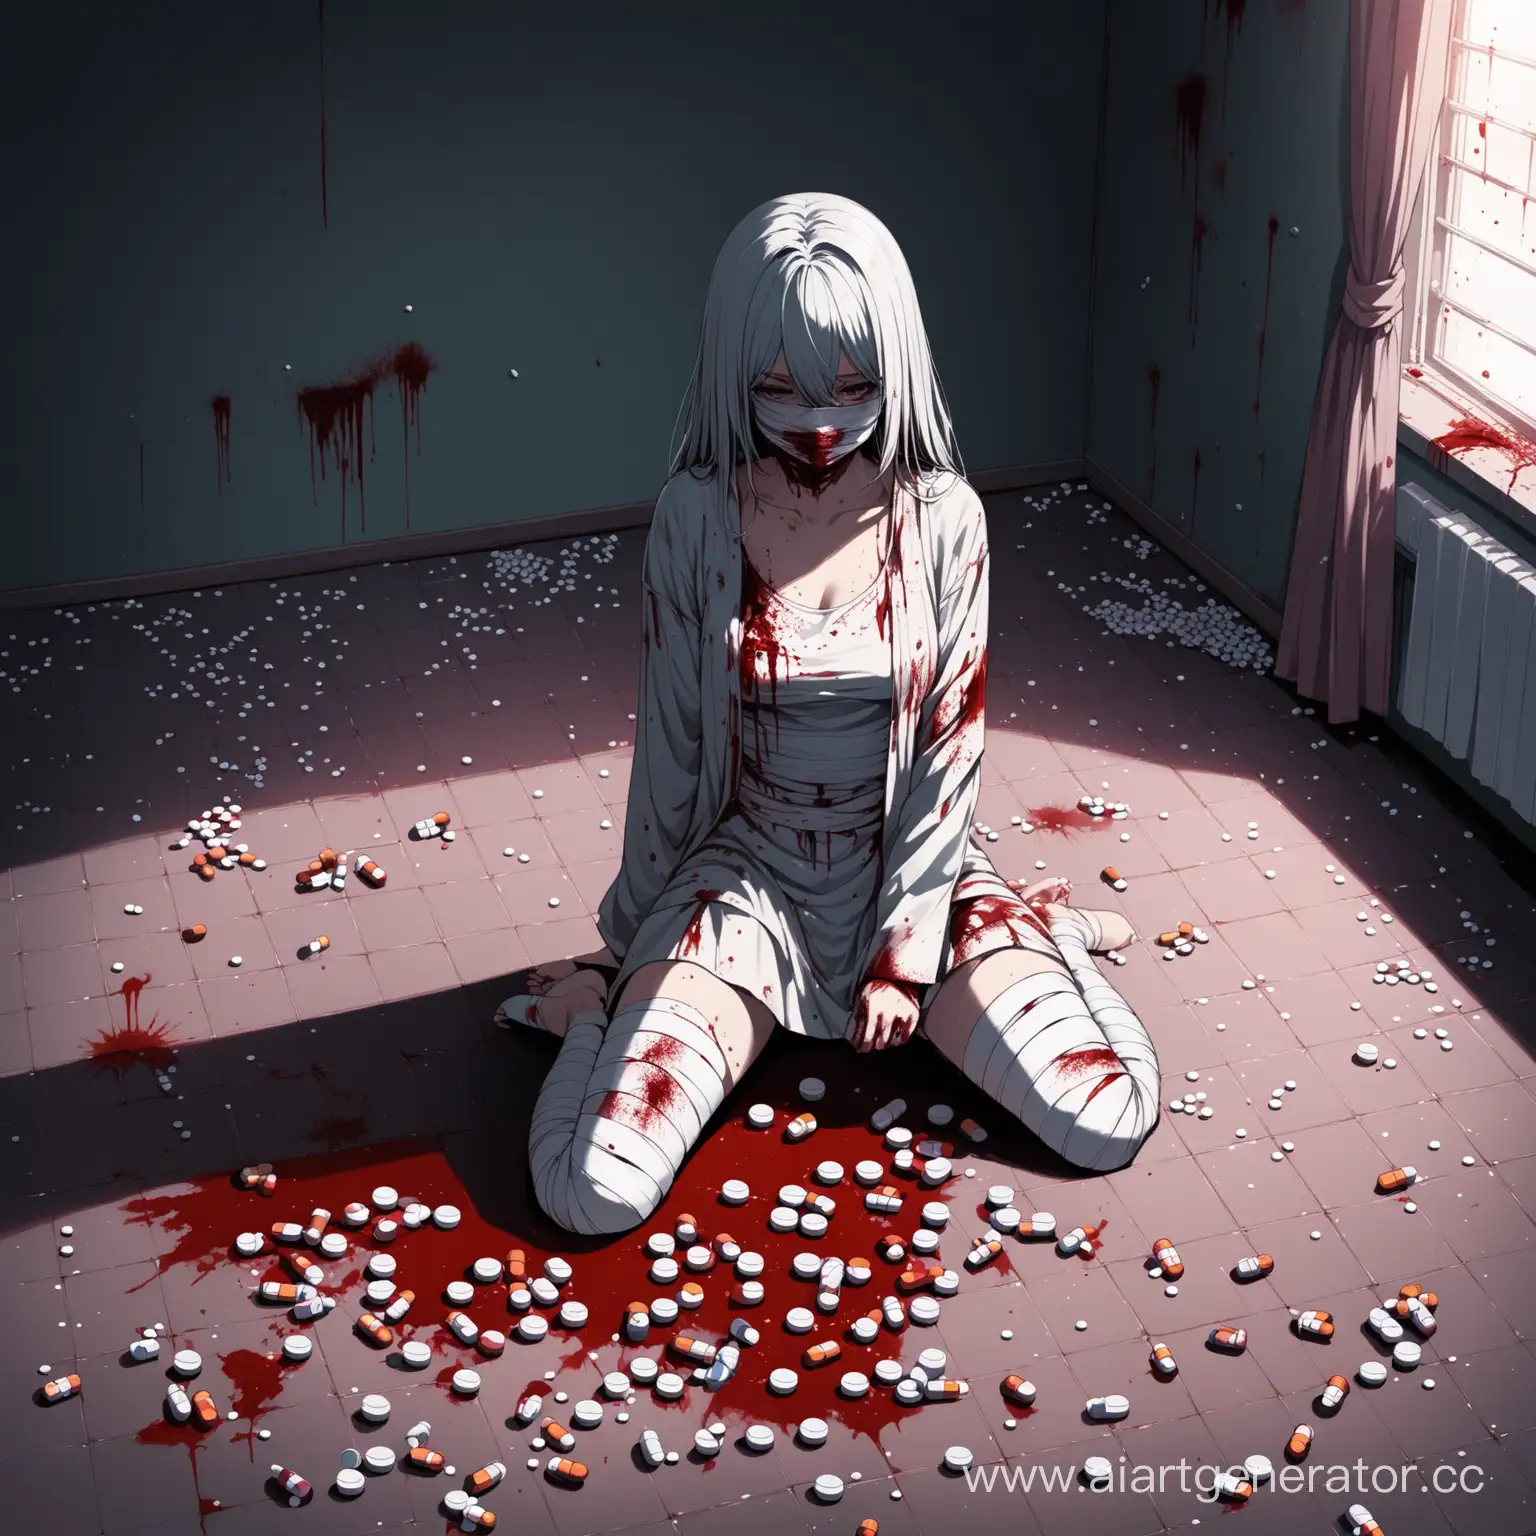 Injured-Girl-Surrounded-by-Scattered-Pills-in-Bloody-Room